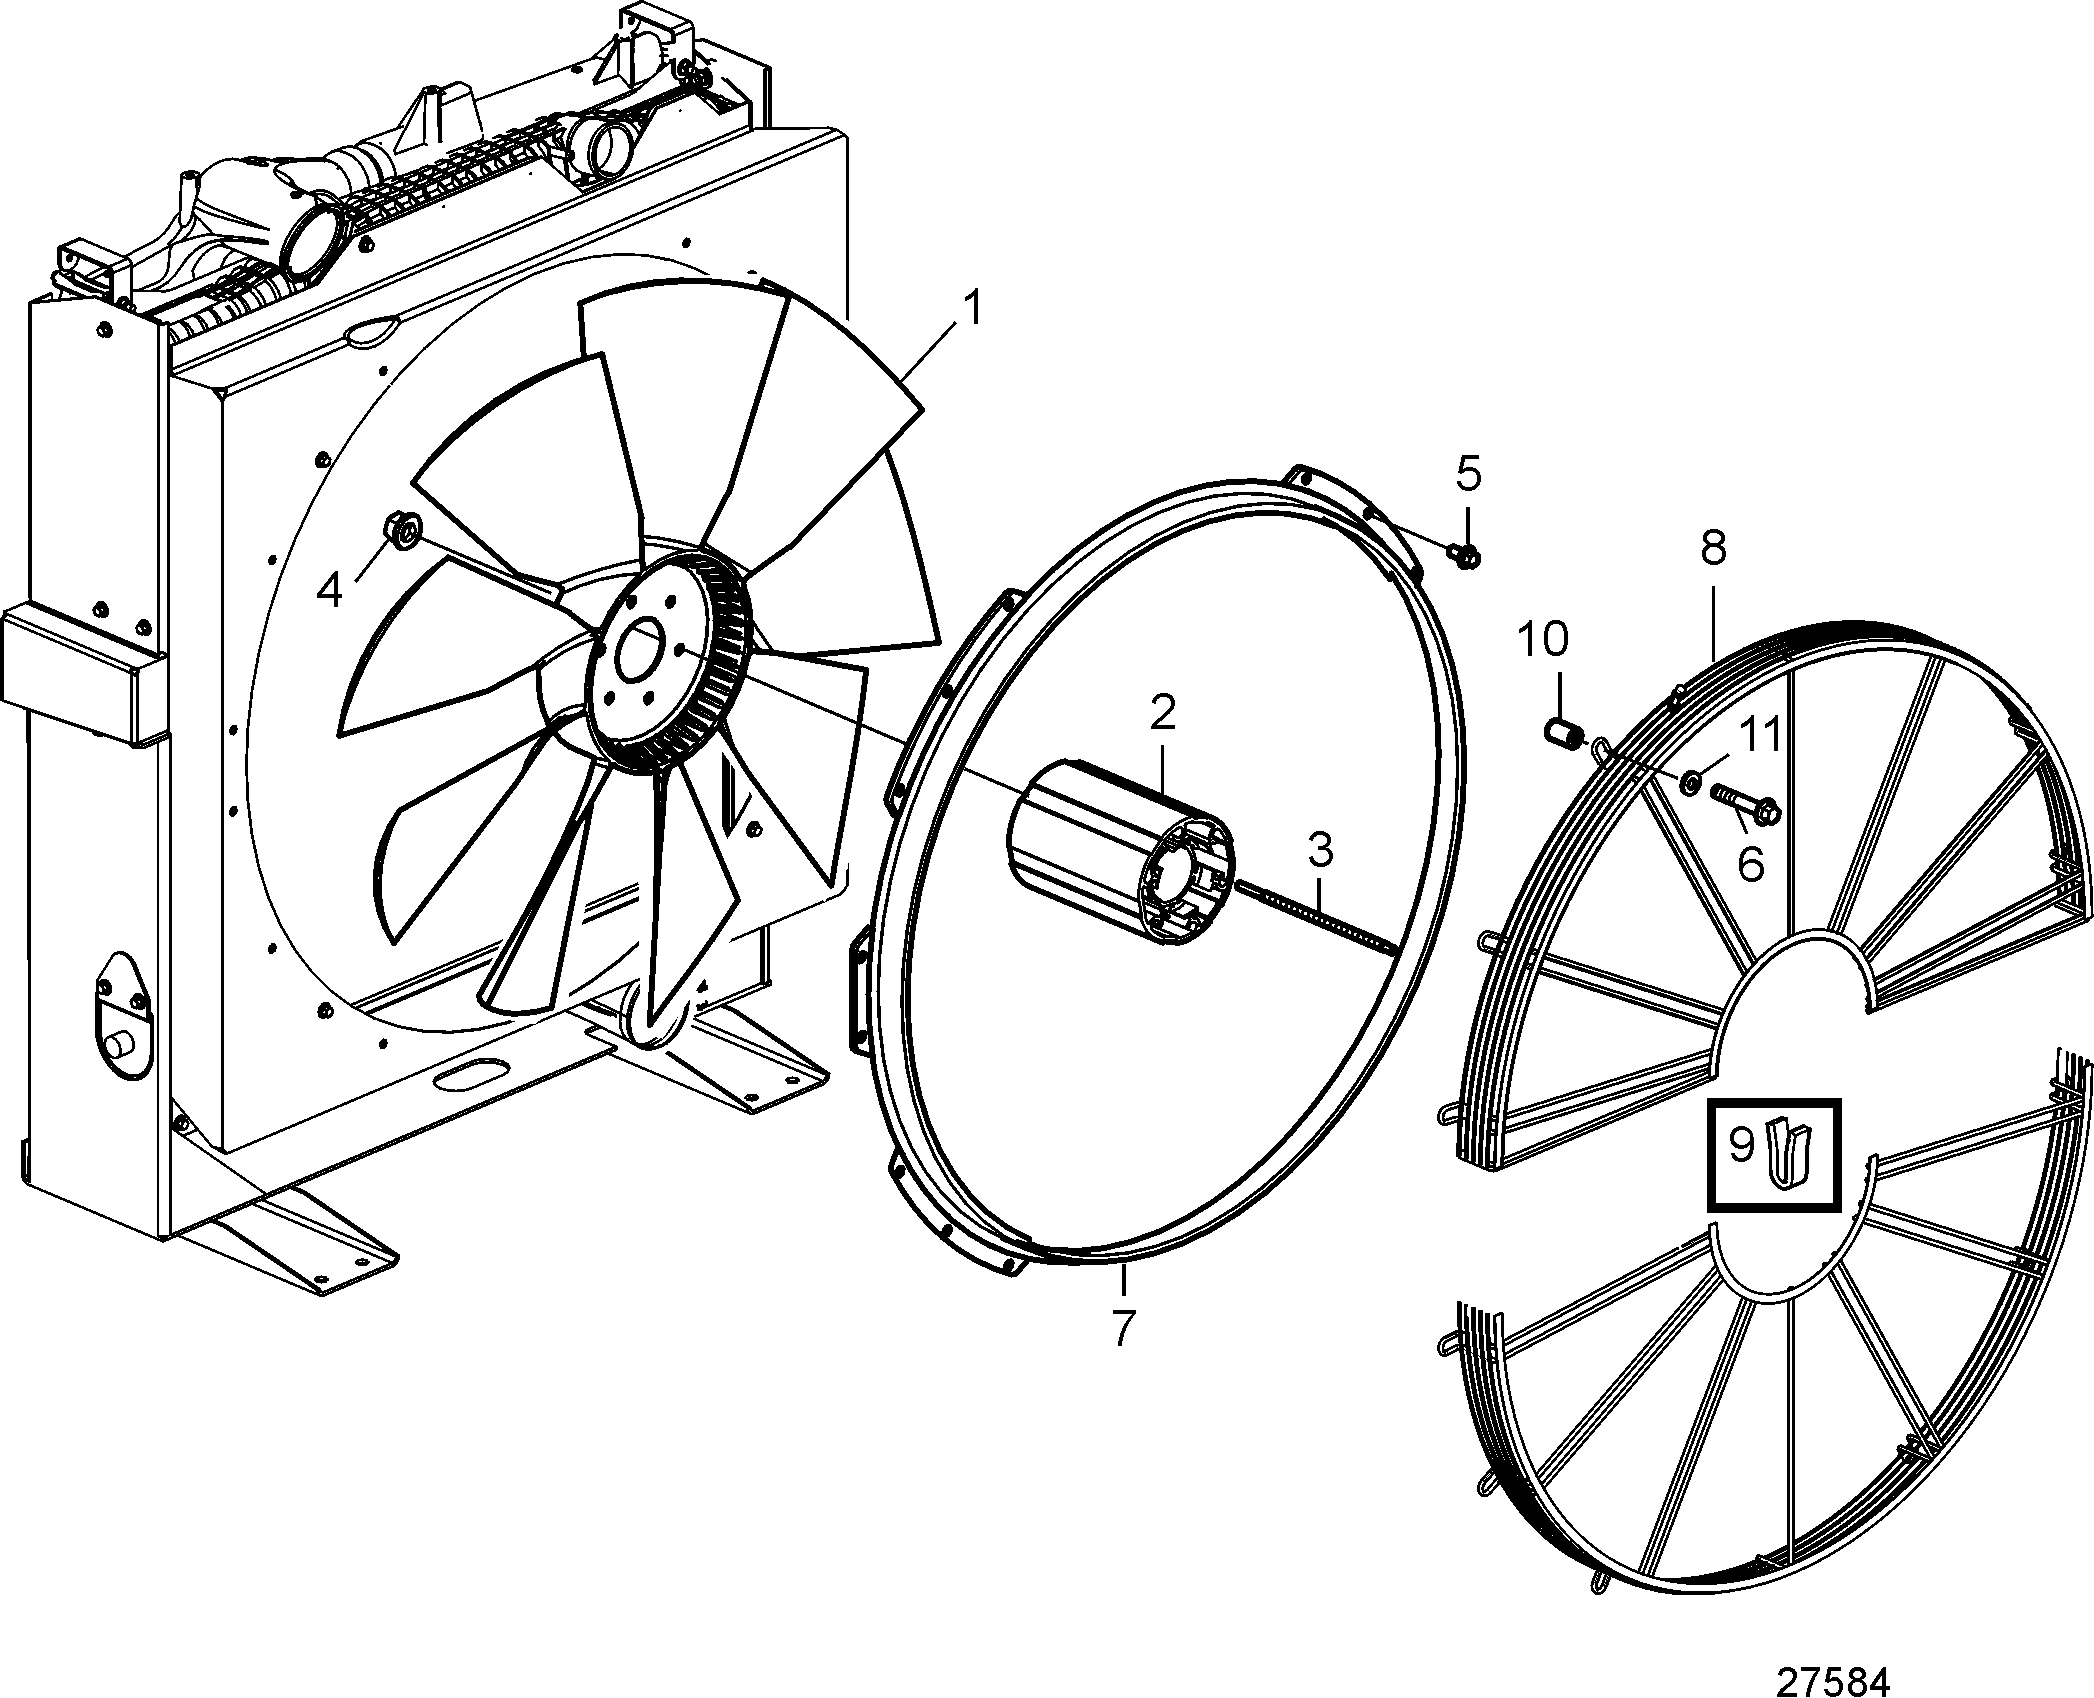 Fan and Fan Ring. D=890mm. Pushing. With Radiator